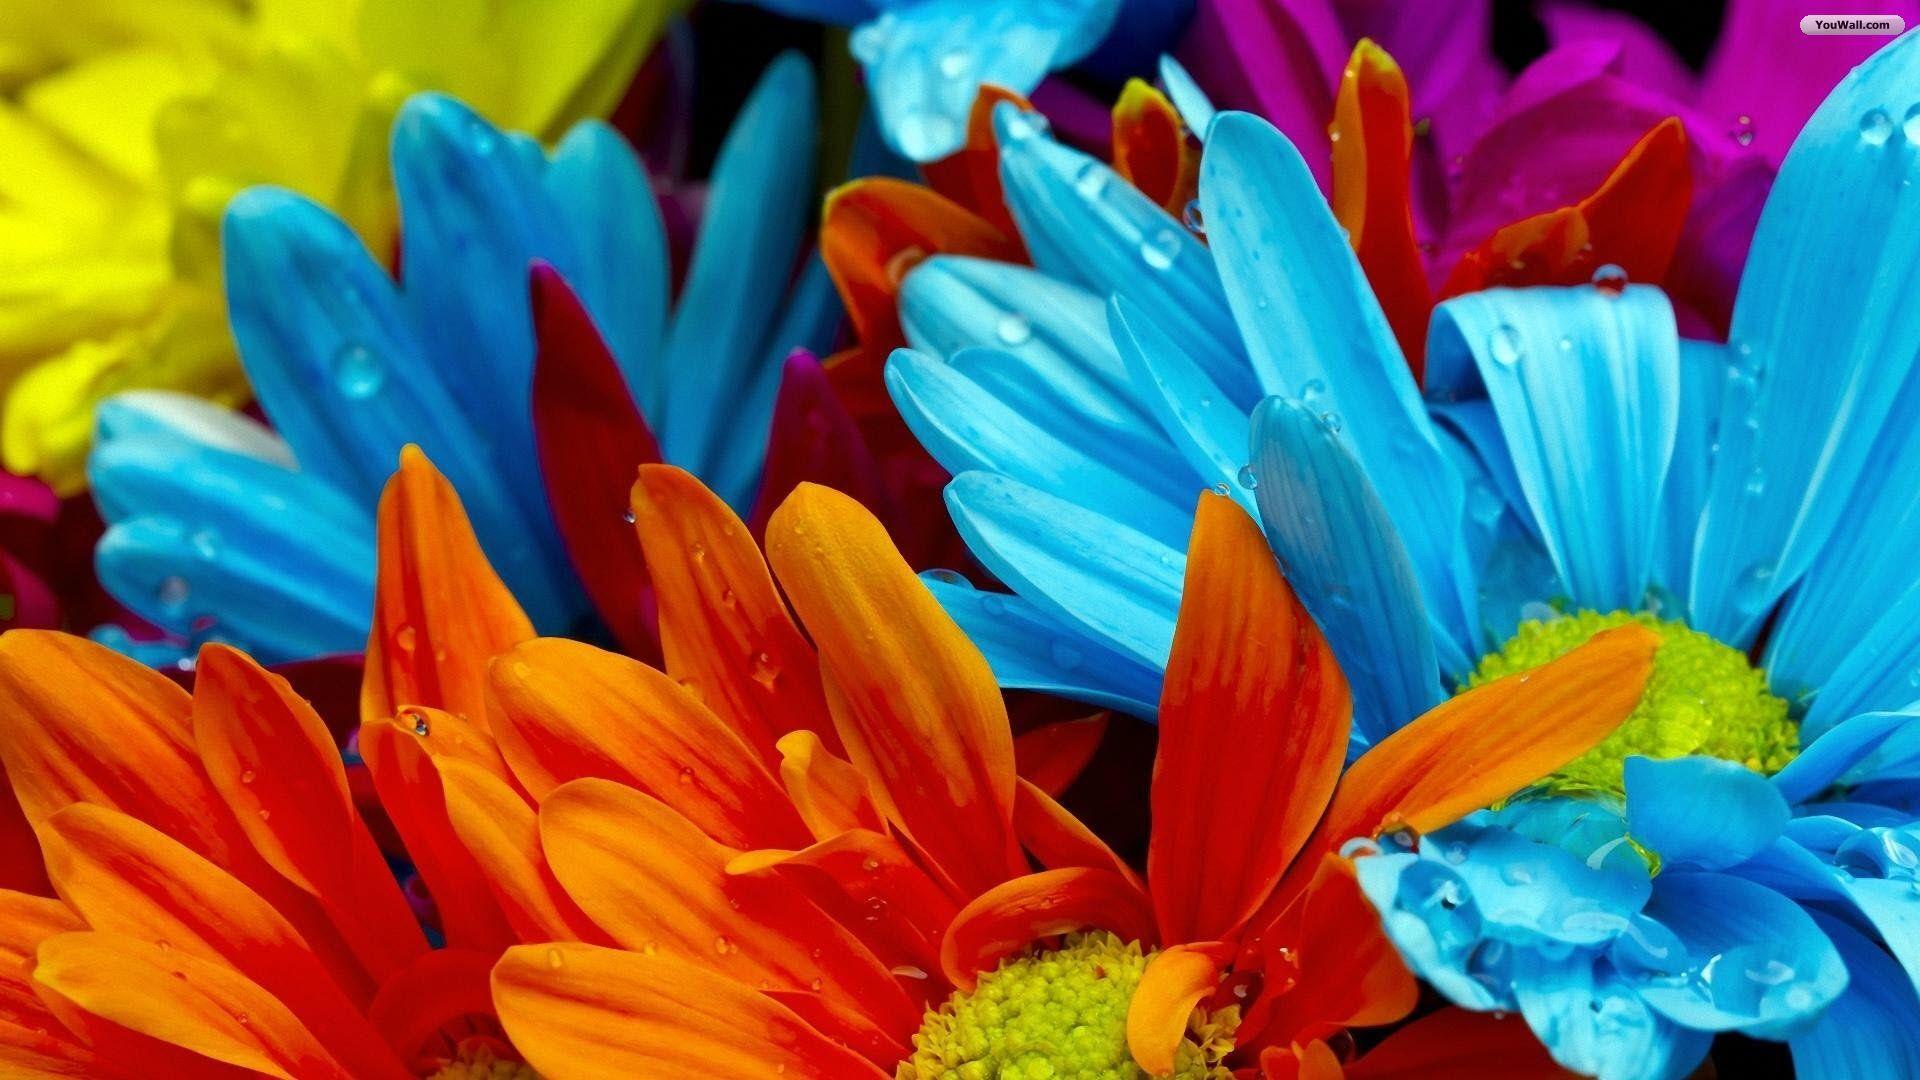 Colorful Flowers wallpaper